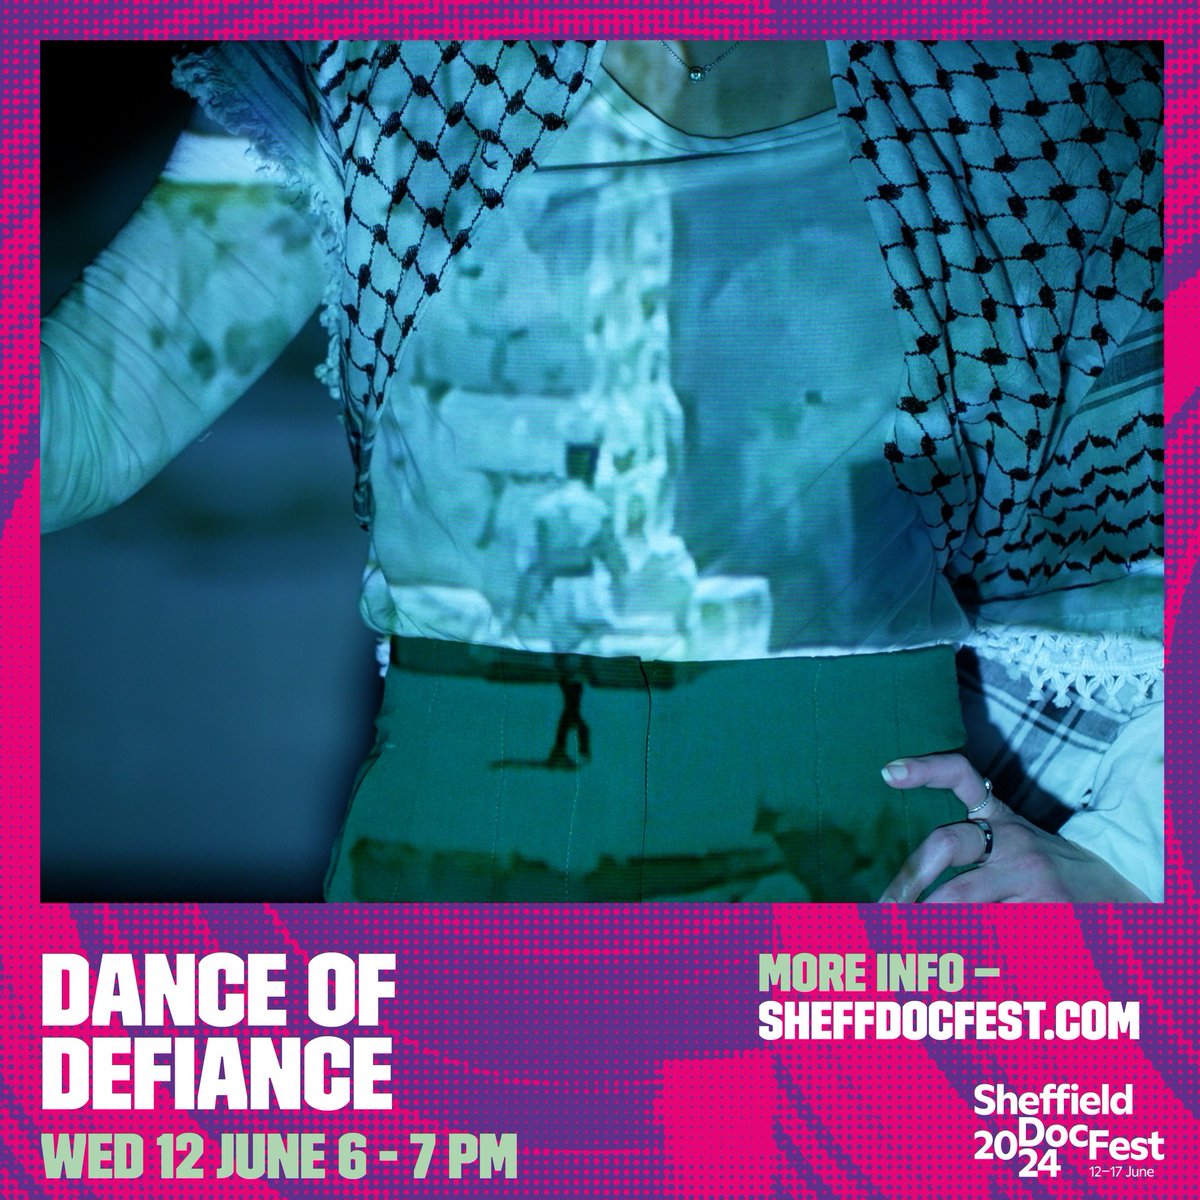 Inspired by the short film Dancing Palestine, this immersive dance workshop will delve into the rich cultural heritage of Palestinian dabke. This free workshop is open to all audiences aged 18+, pre-registration is required. Register now at: sheffdocfest.com/composition/da…